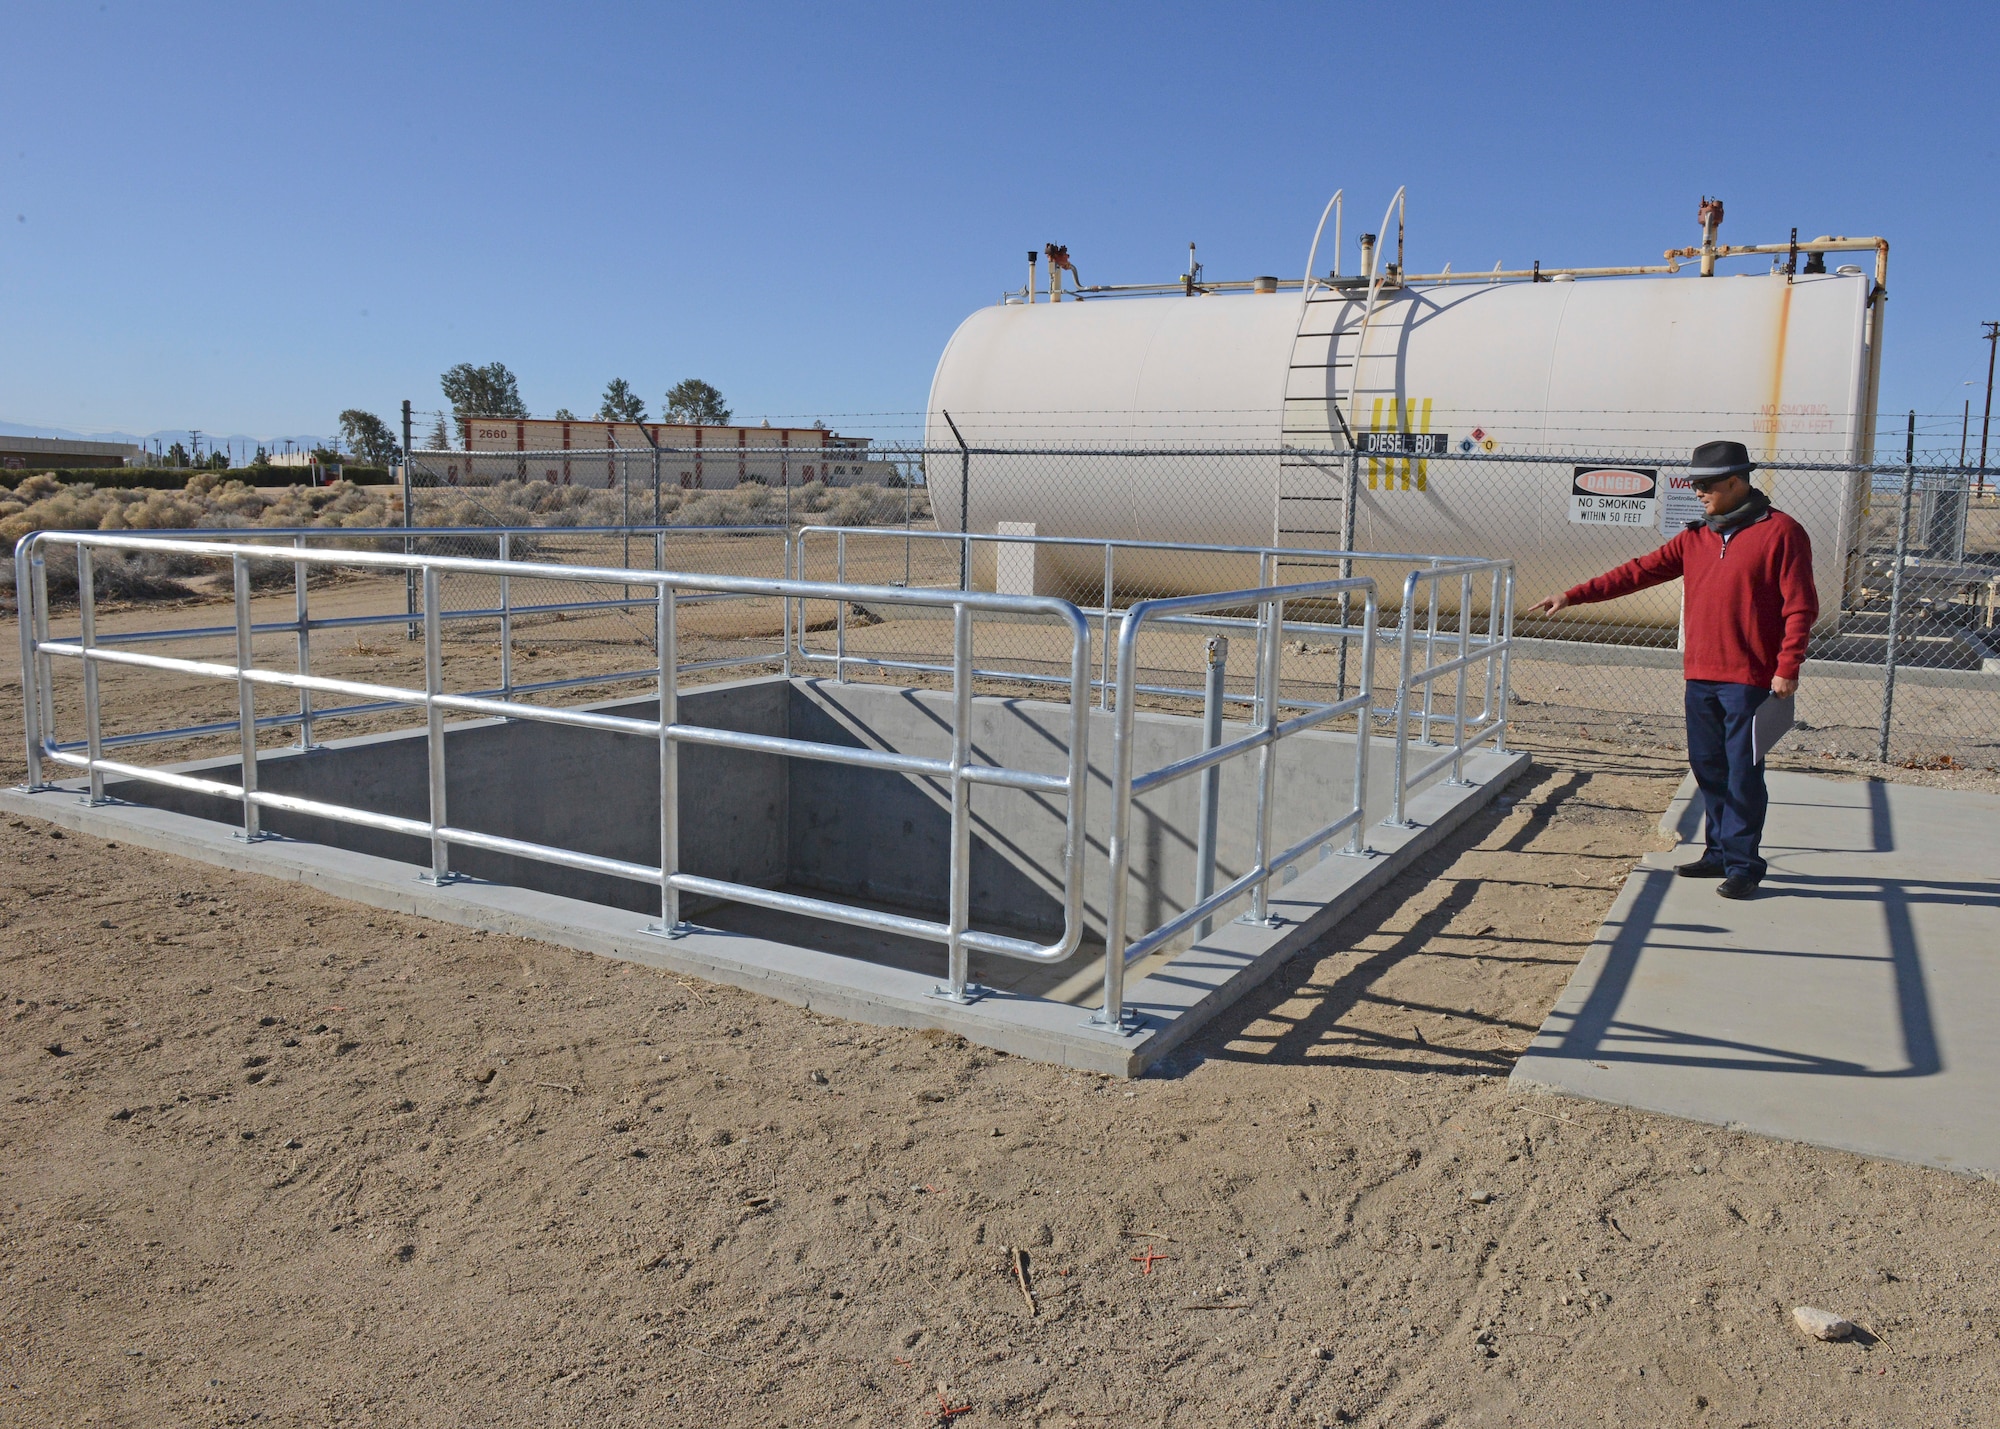 Jose Delavega, 412th Civil Engineer Group civil engineer, stands next to a new isolation pit to contain accidental fuel spills at the fuel transfer area at the main base military gas station Feb. 26. (U.S. Air Force photo by Kenji Thuloweit)